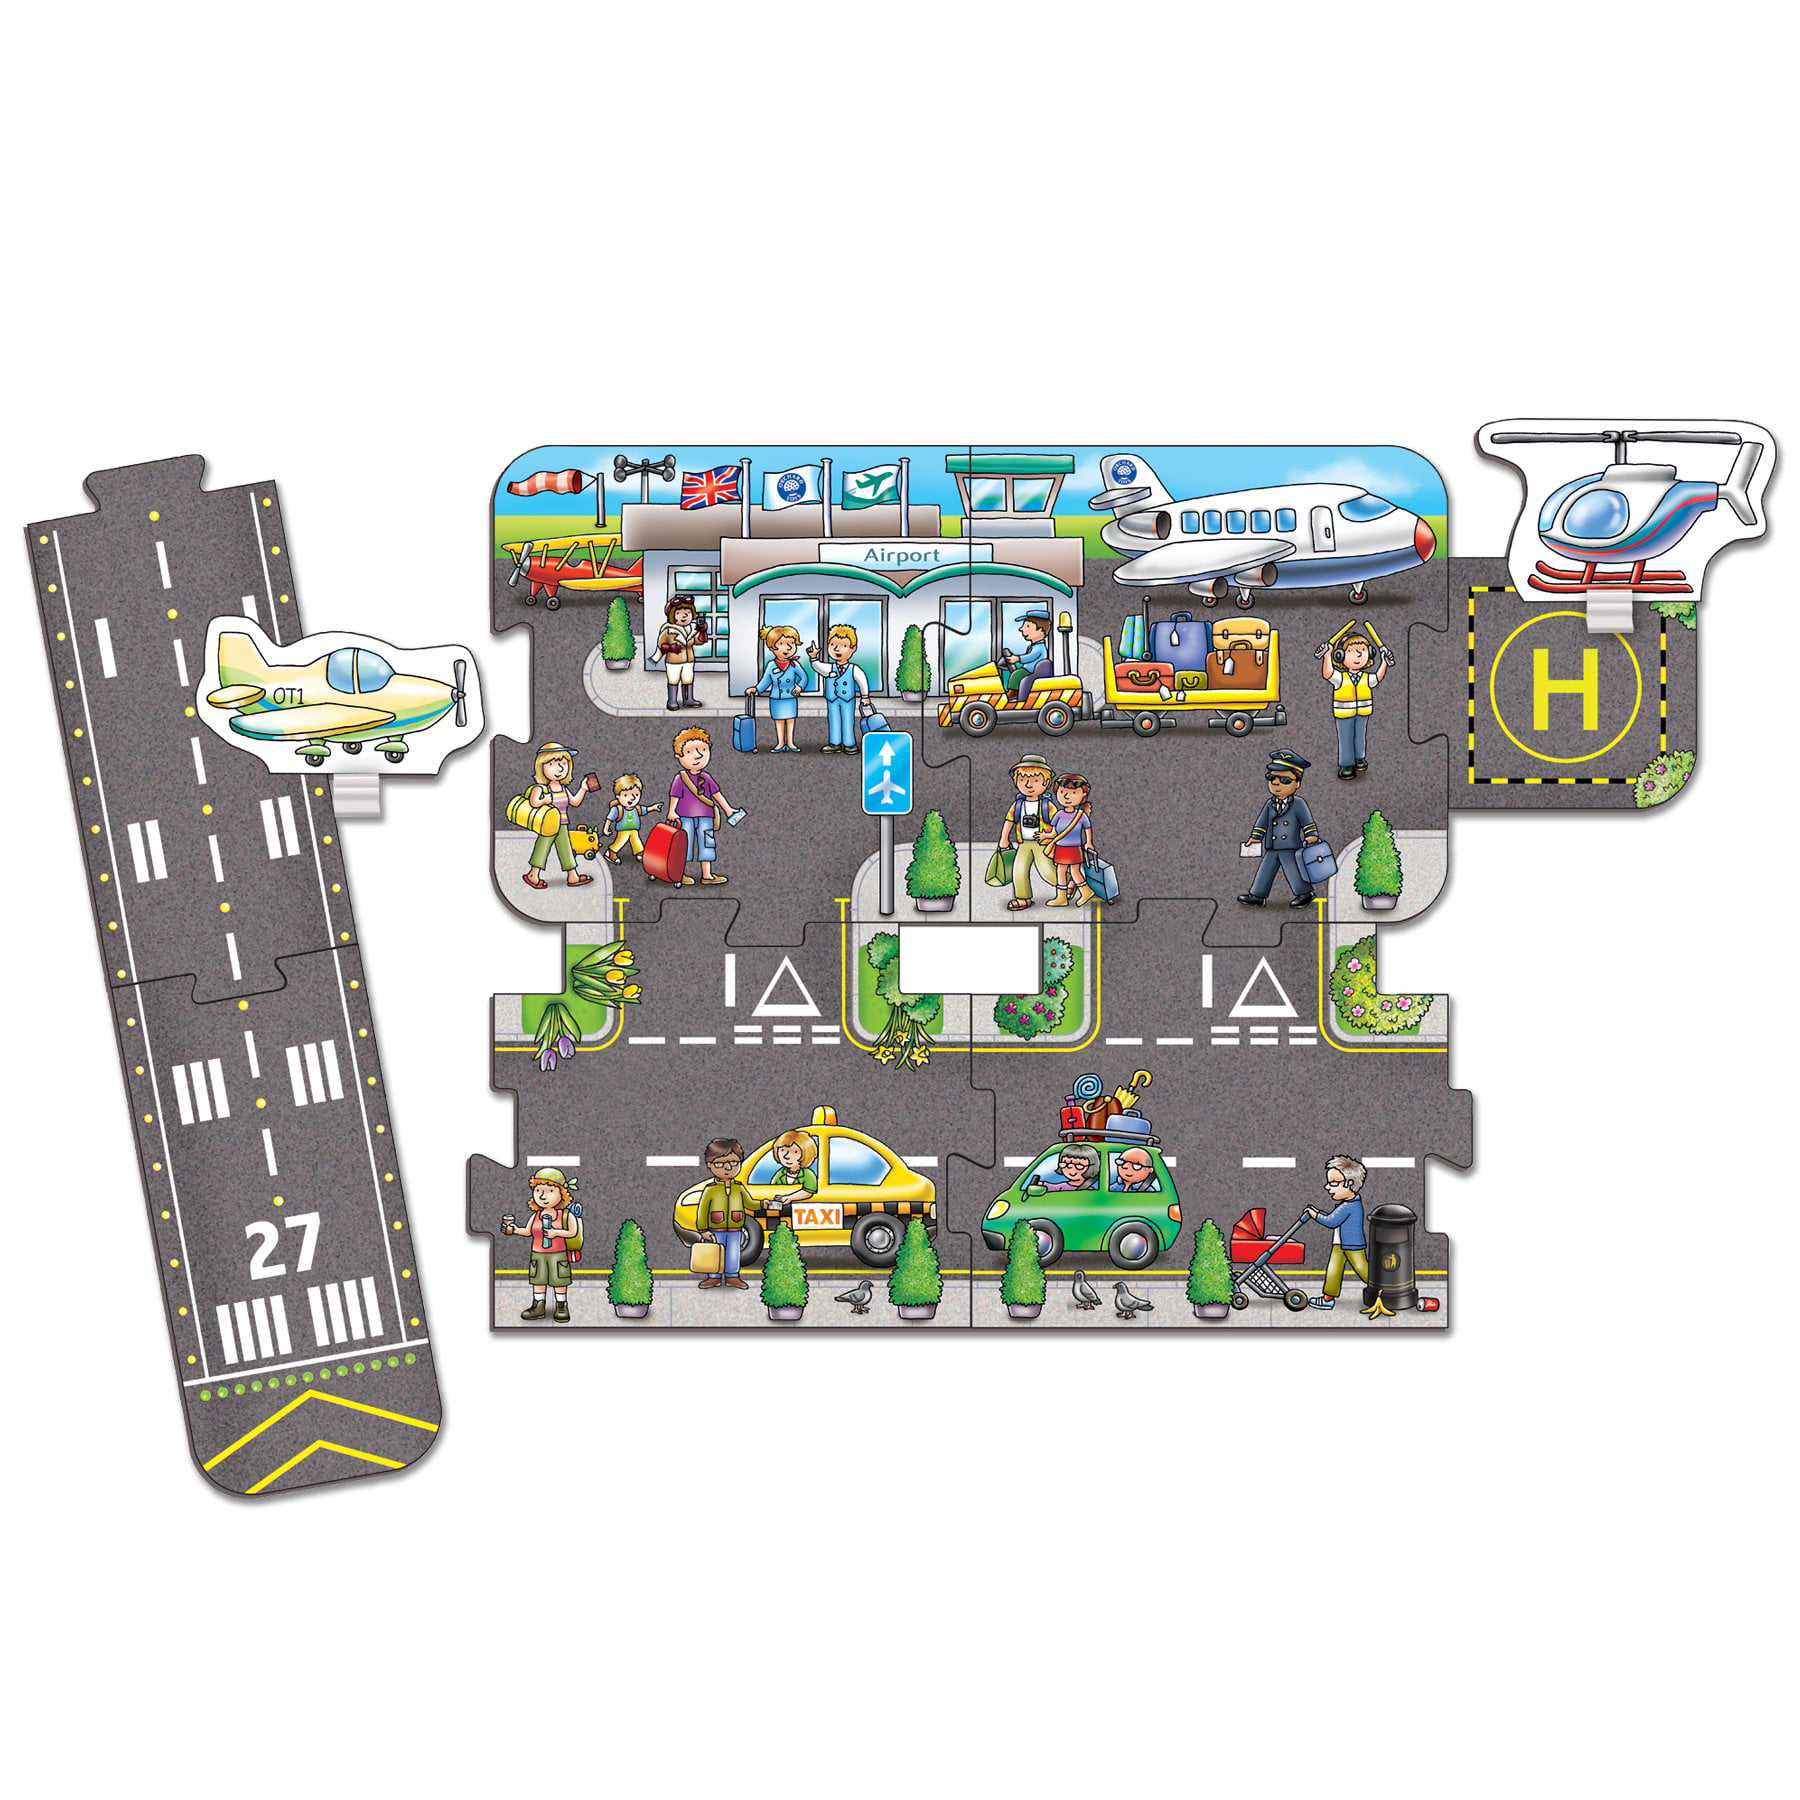 Orchard Toys Junctions Expansion Pack Puzzle 